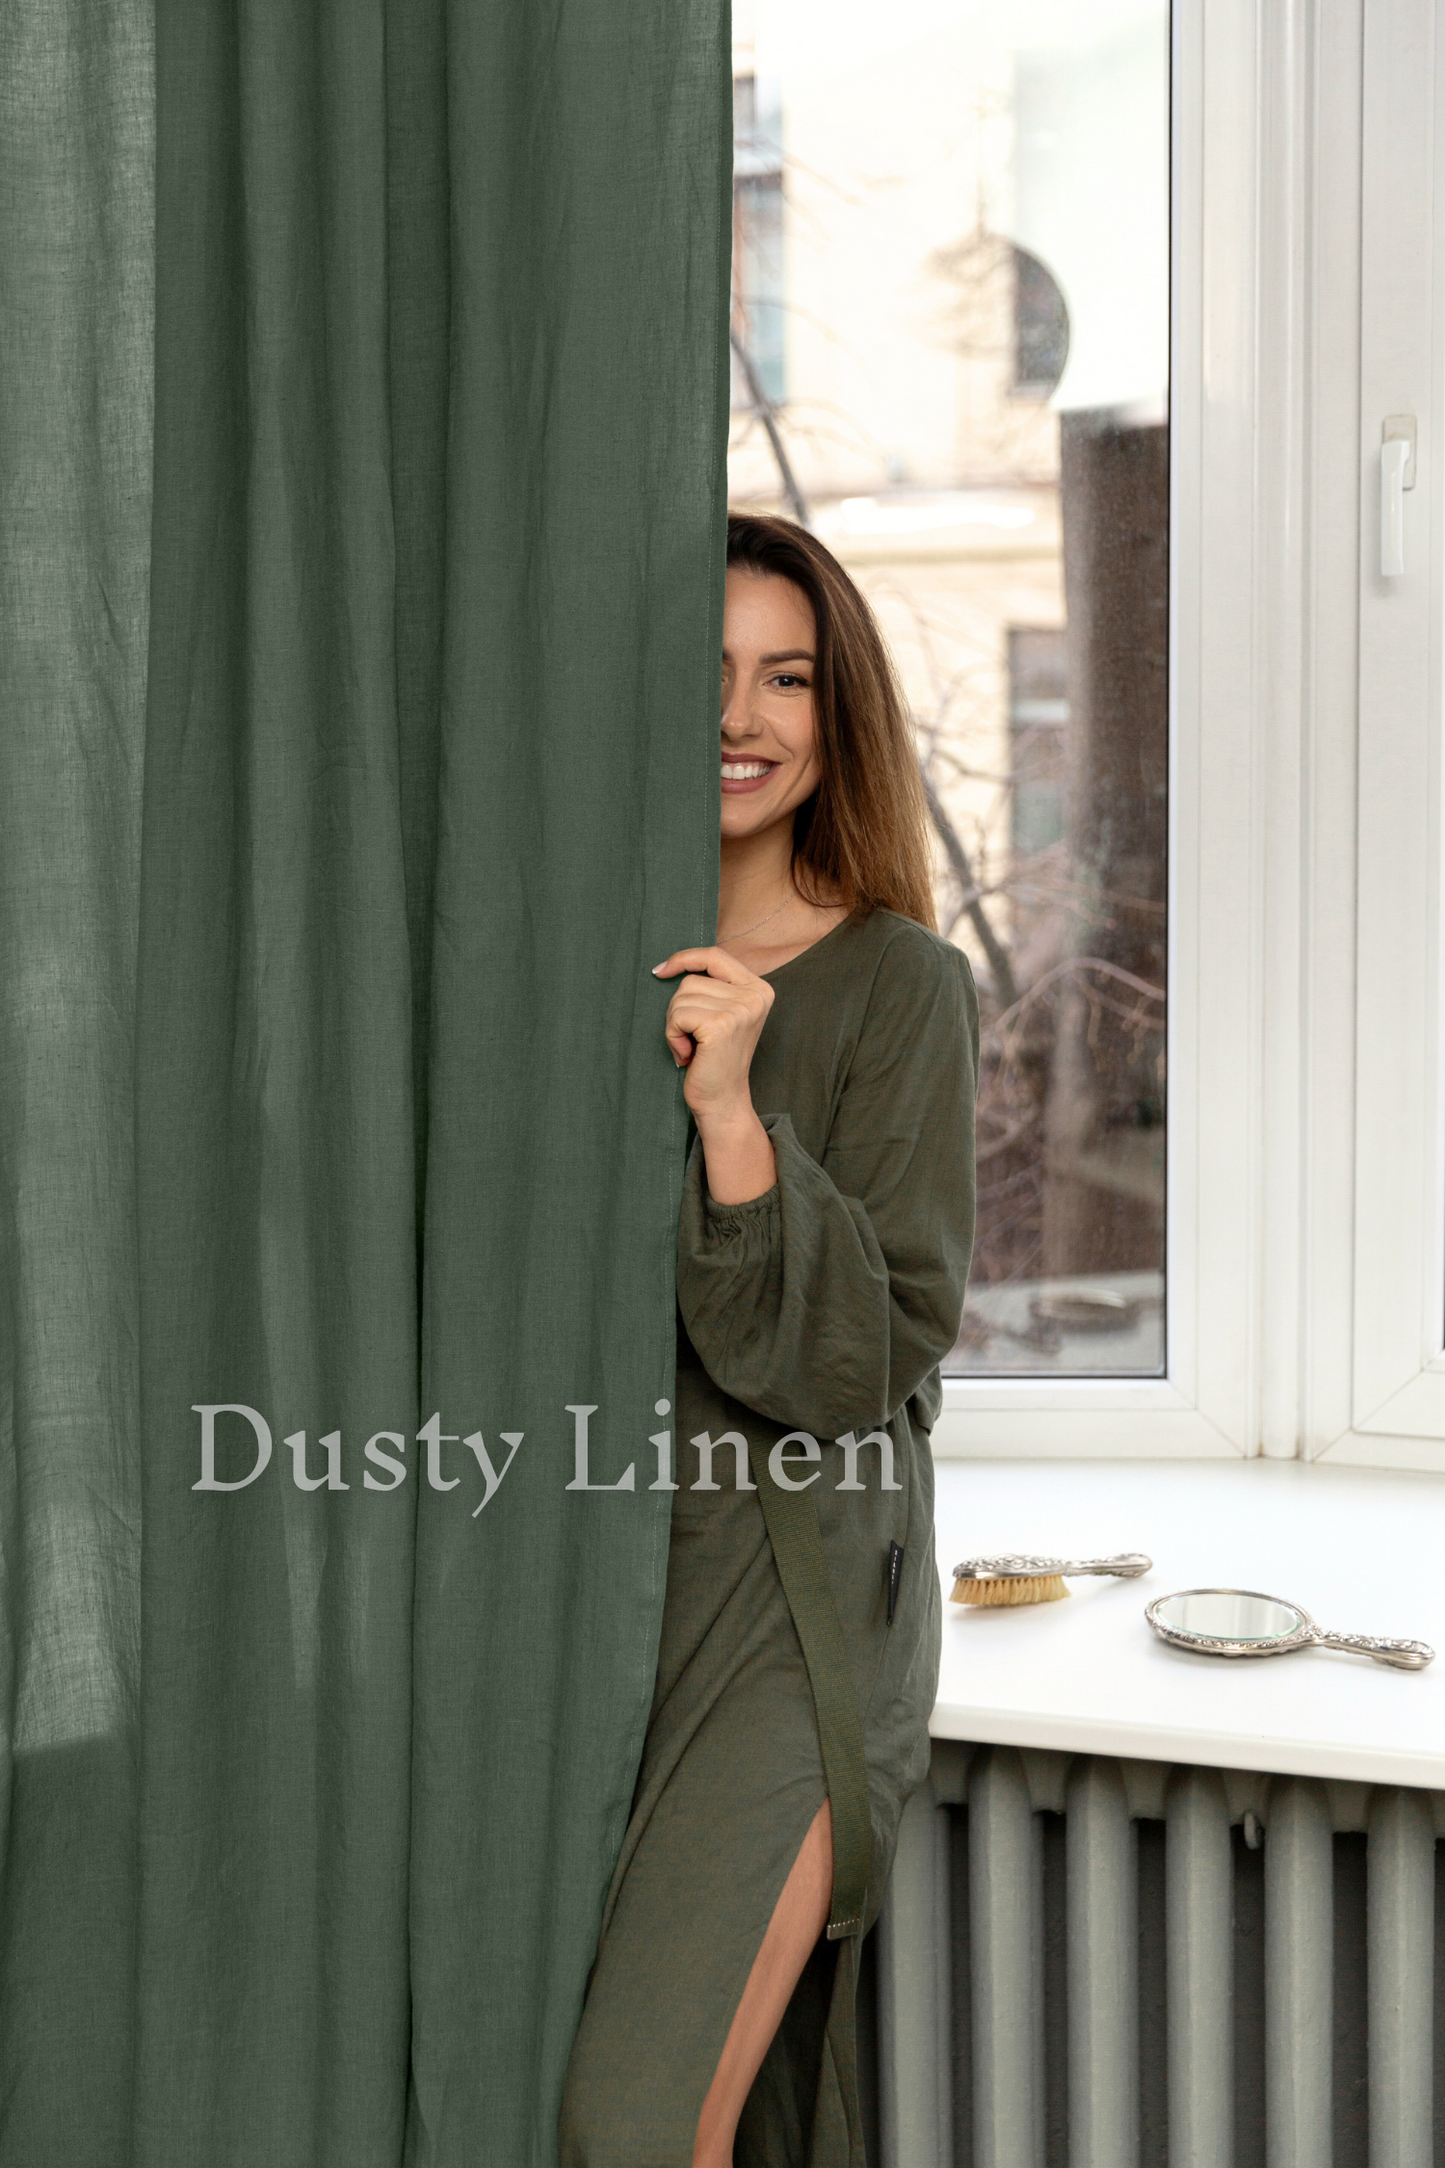 a woman standing behind a curtain holding a cell phone